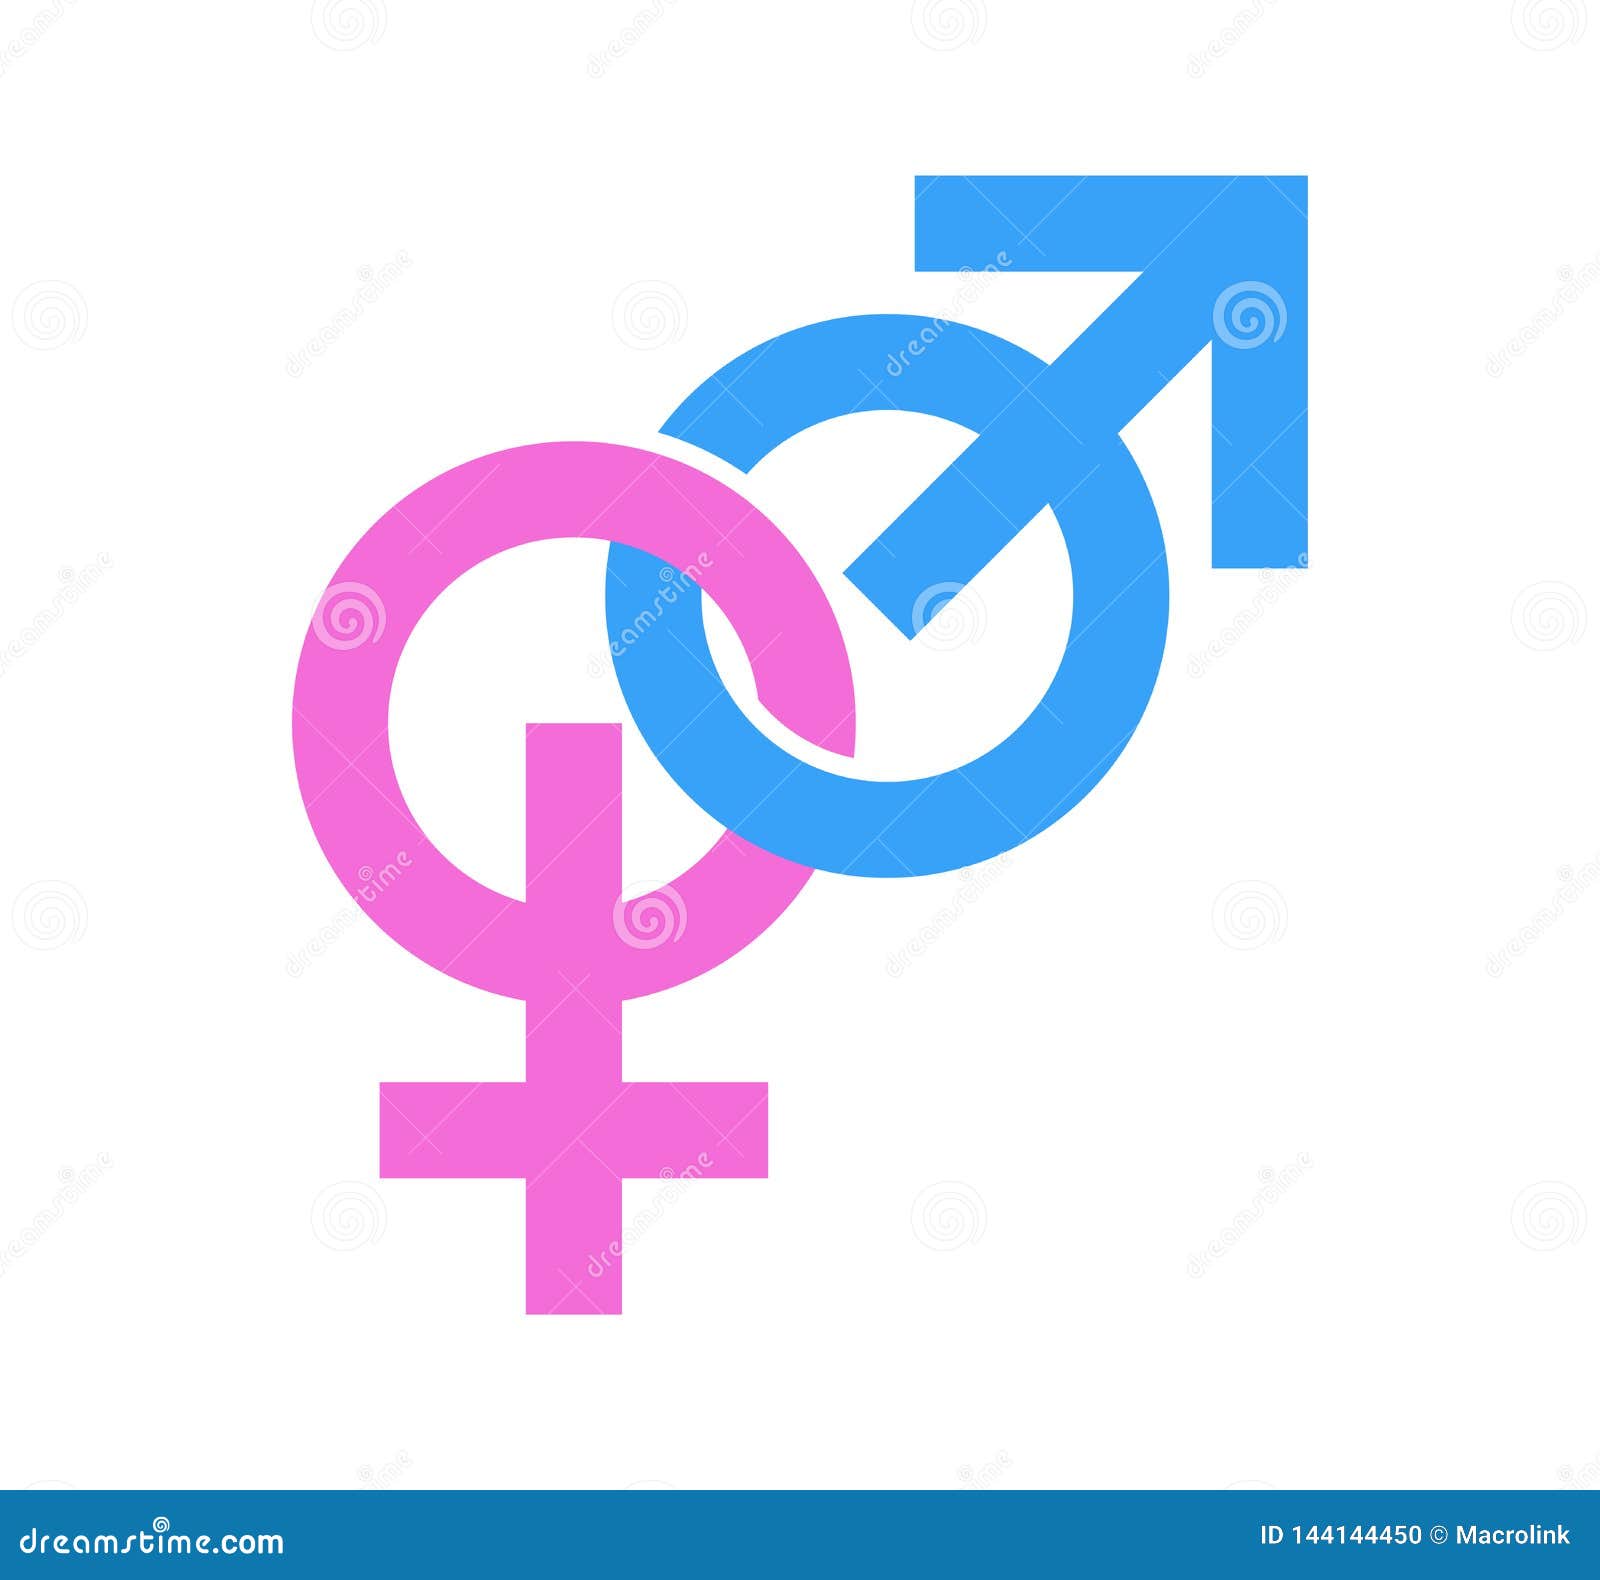 Couple Of Gender Signs. Icons Of Masculine And Feminine Linked. Vector ...